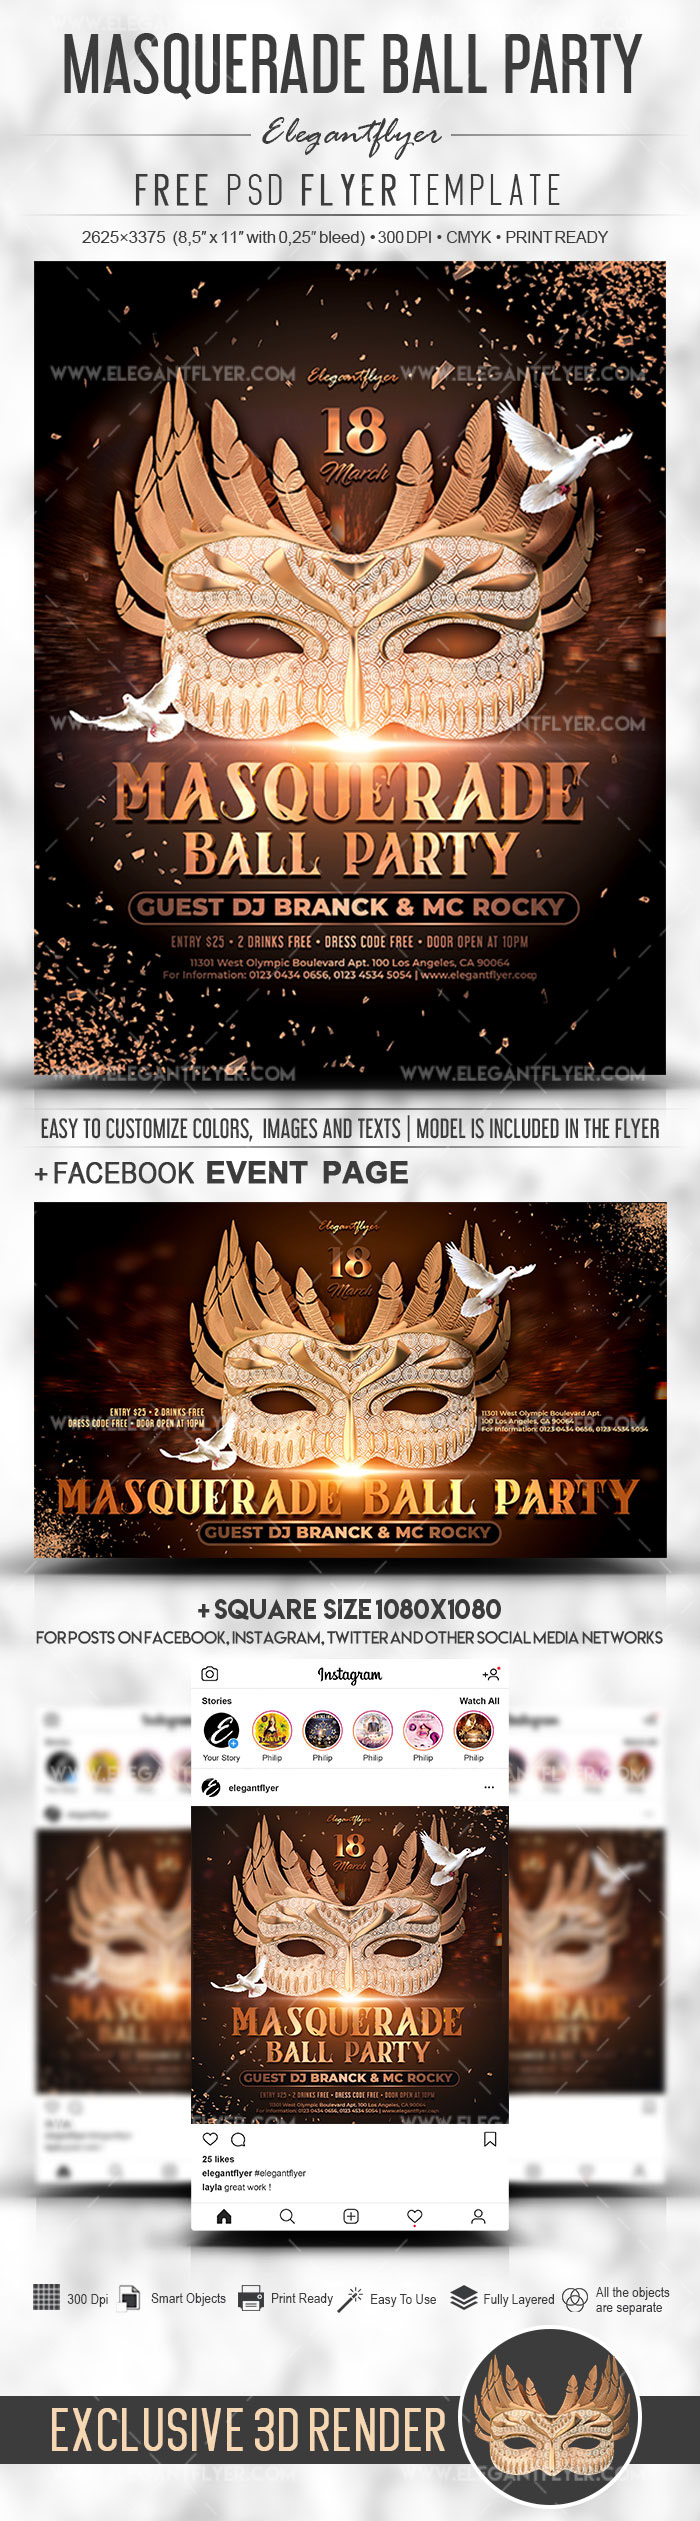 masquerade-ball-party-free-psd-flyer-template-on-behance